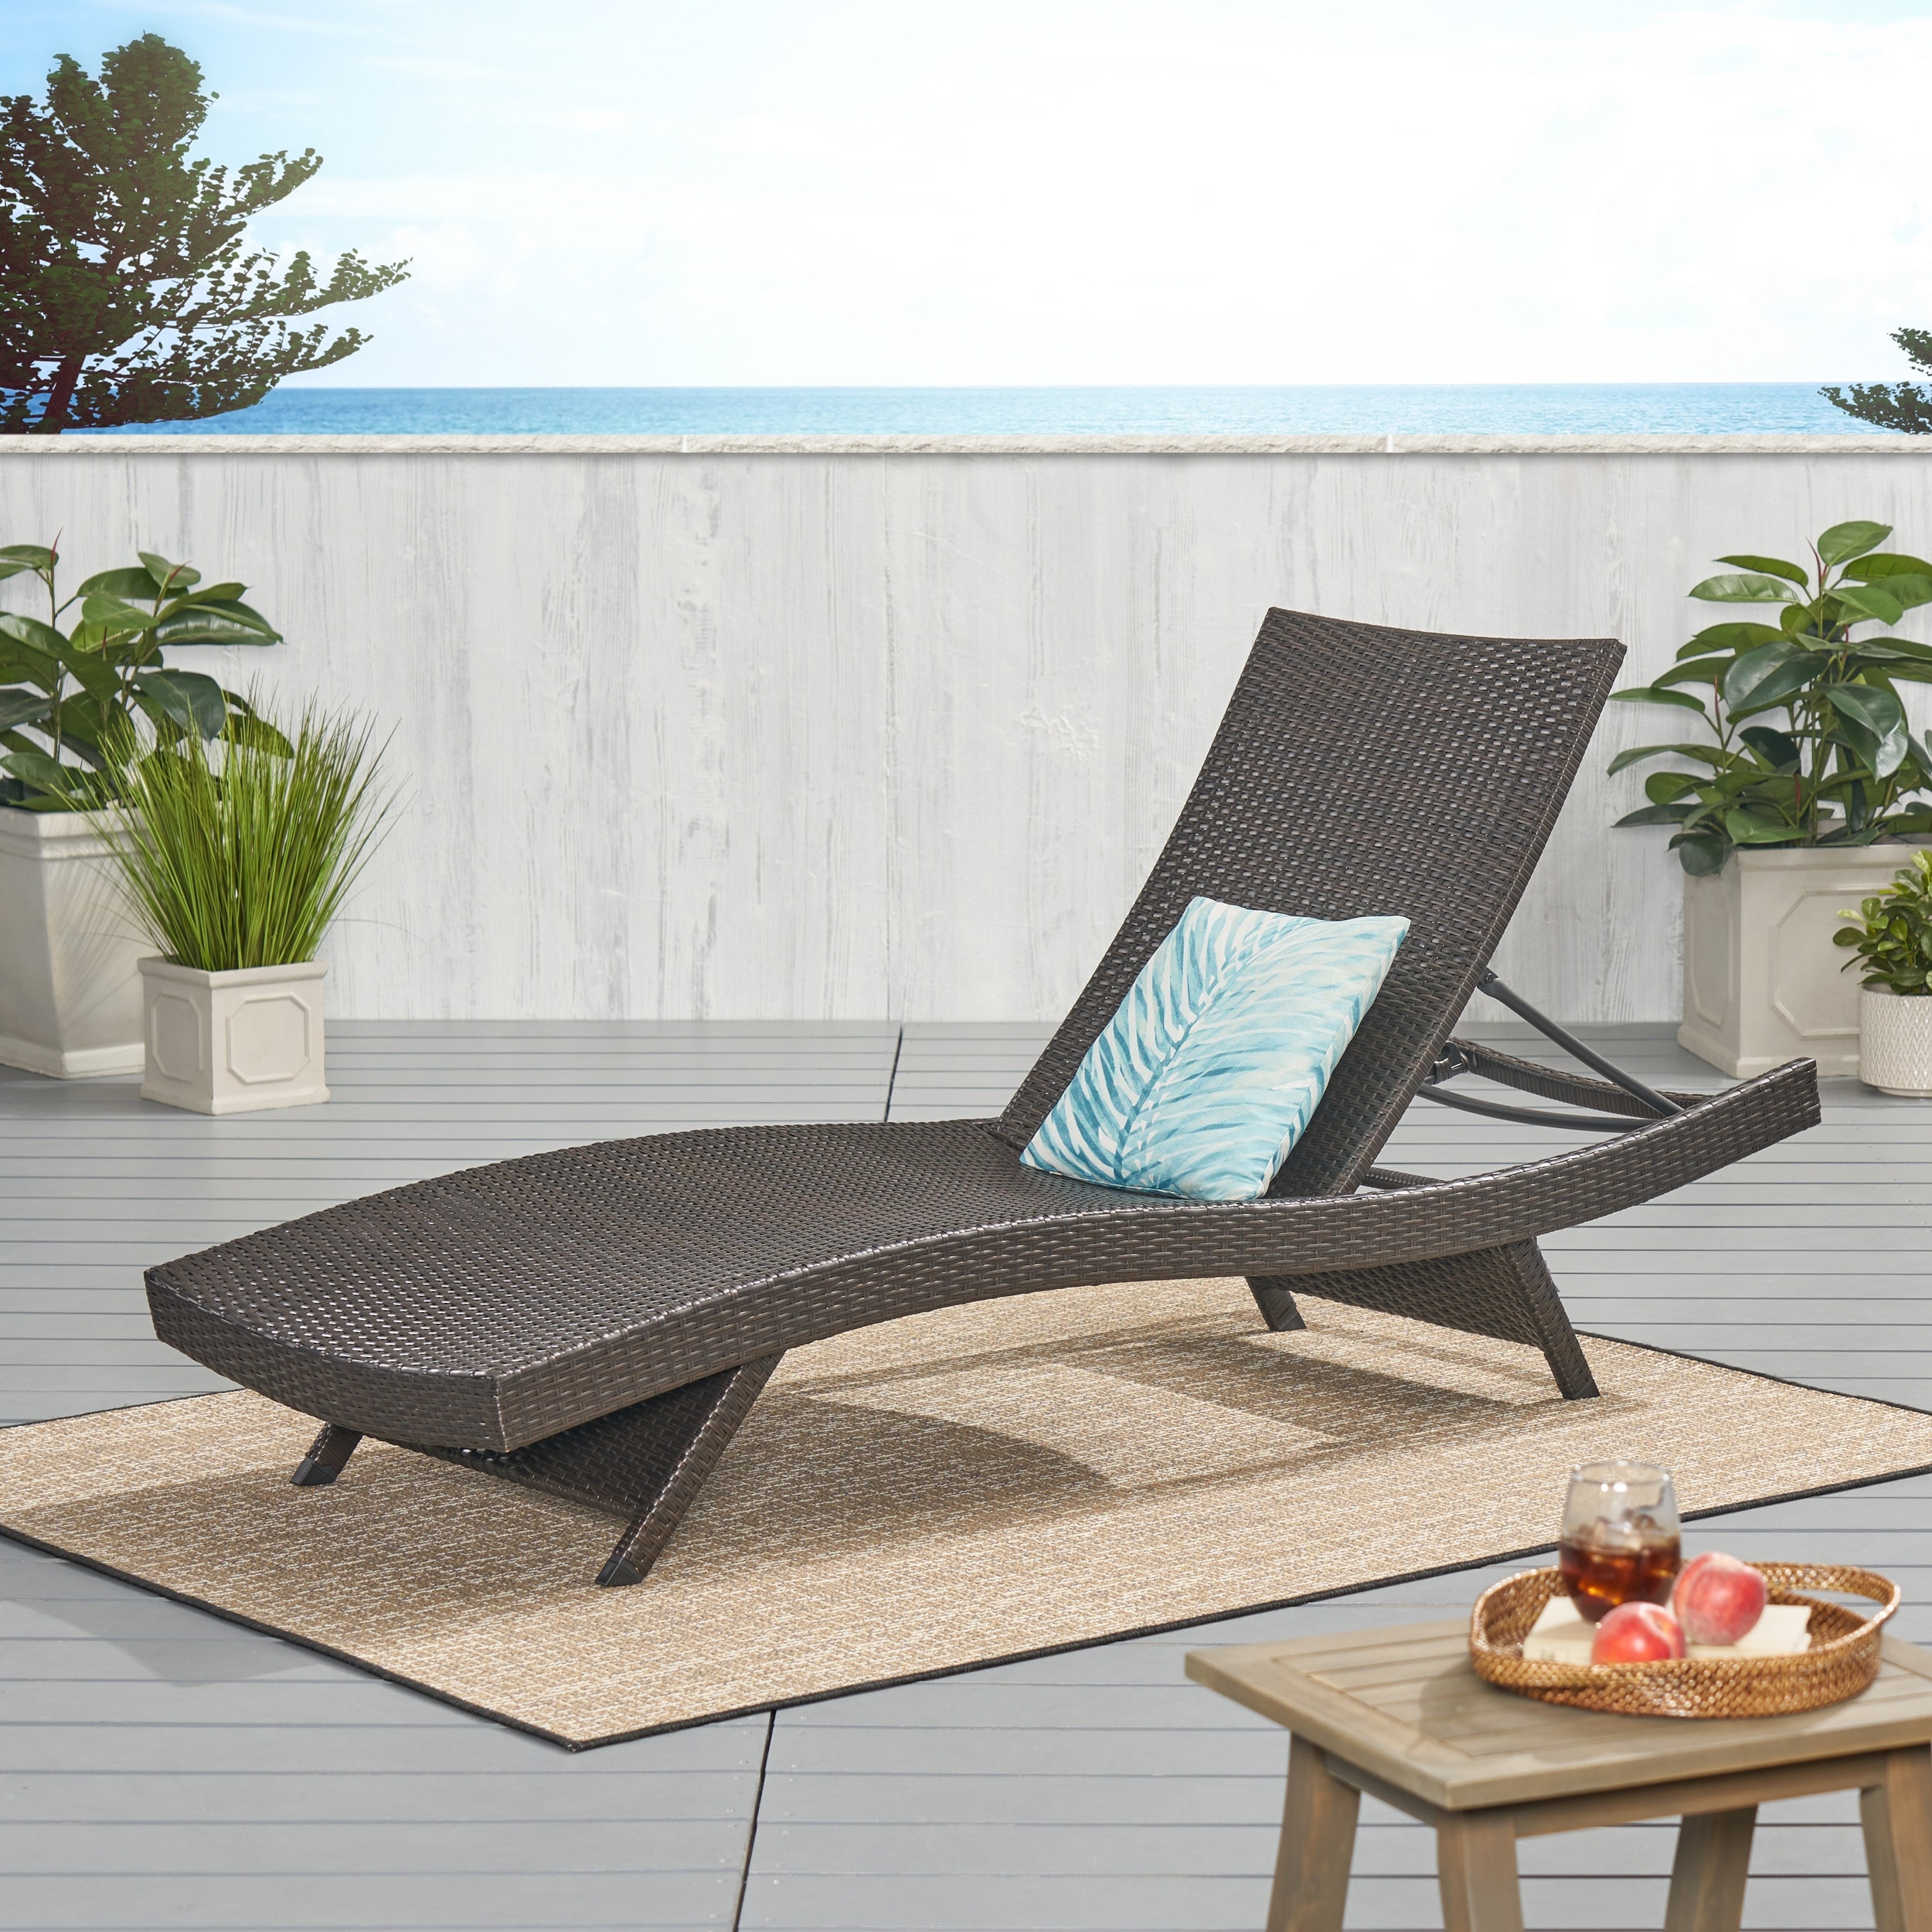 Christopher Knight Home Salem Outdoor Charcoal Water Resistant Chaise Lounge Cushion 